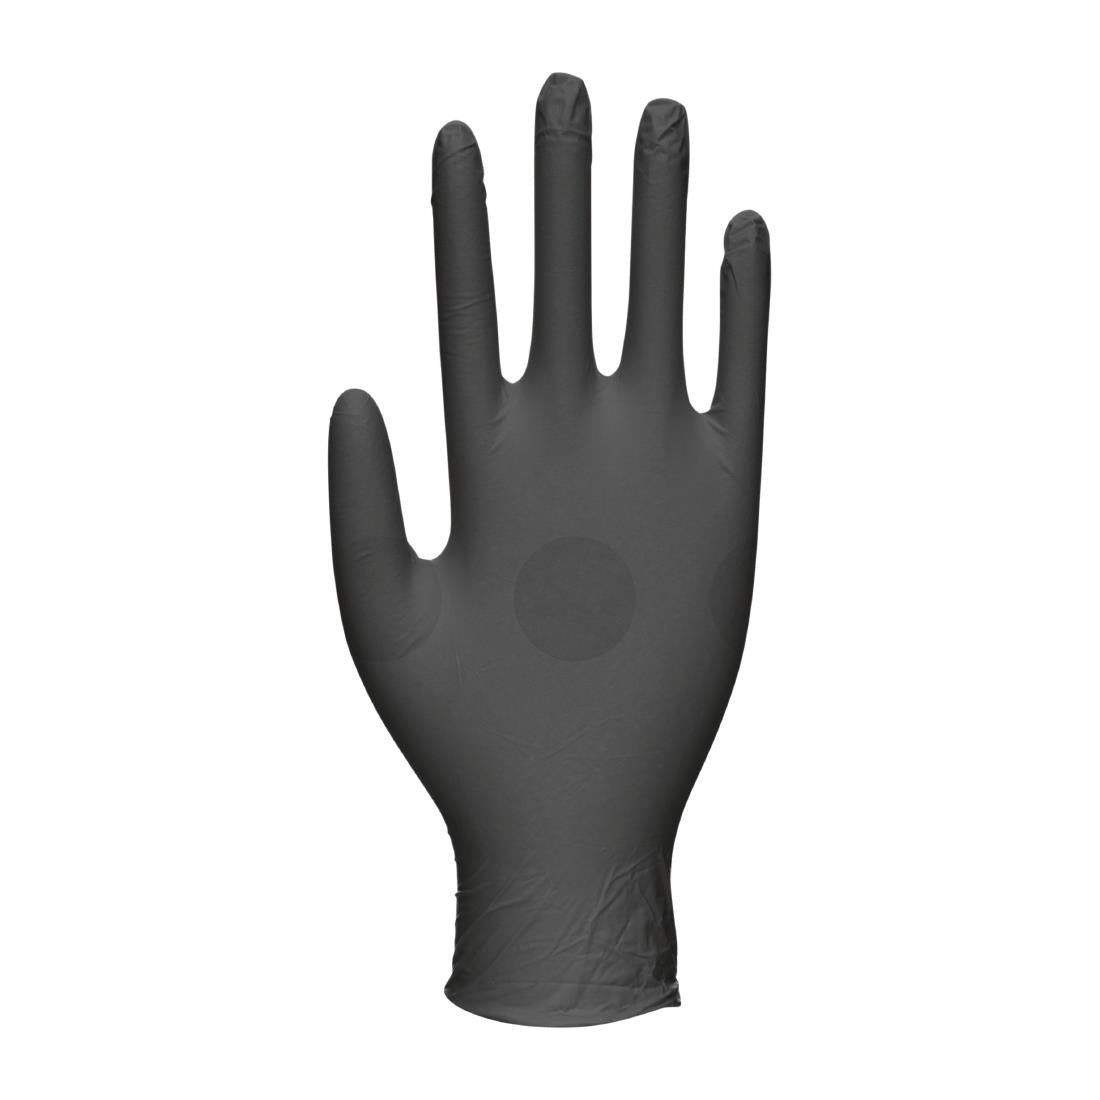 FW845-L Biotouch Single Use Glove Black Nitrile Powder Free Size Large (Pack of 100)